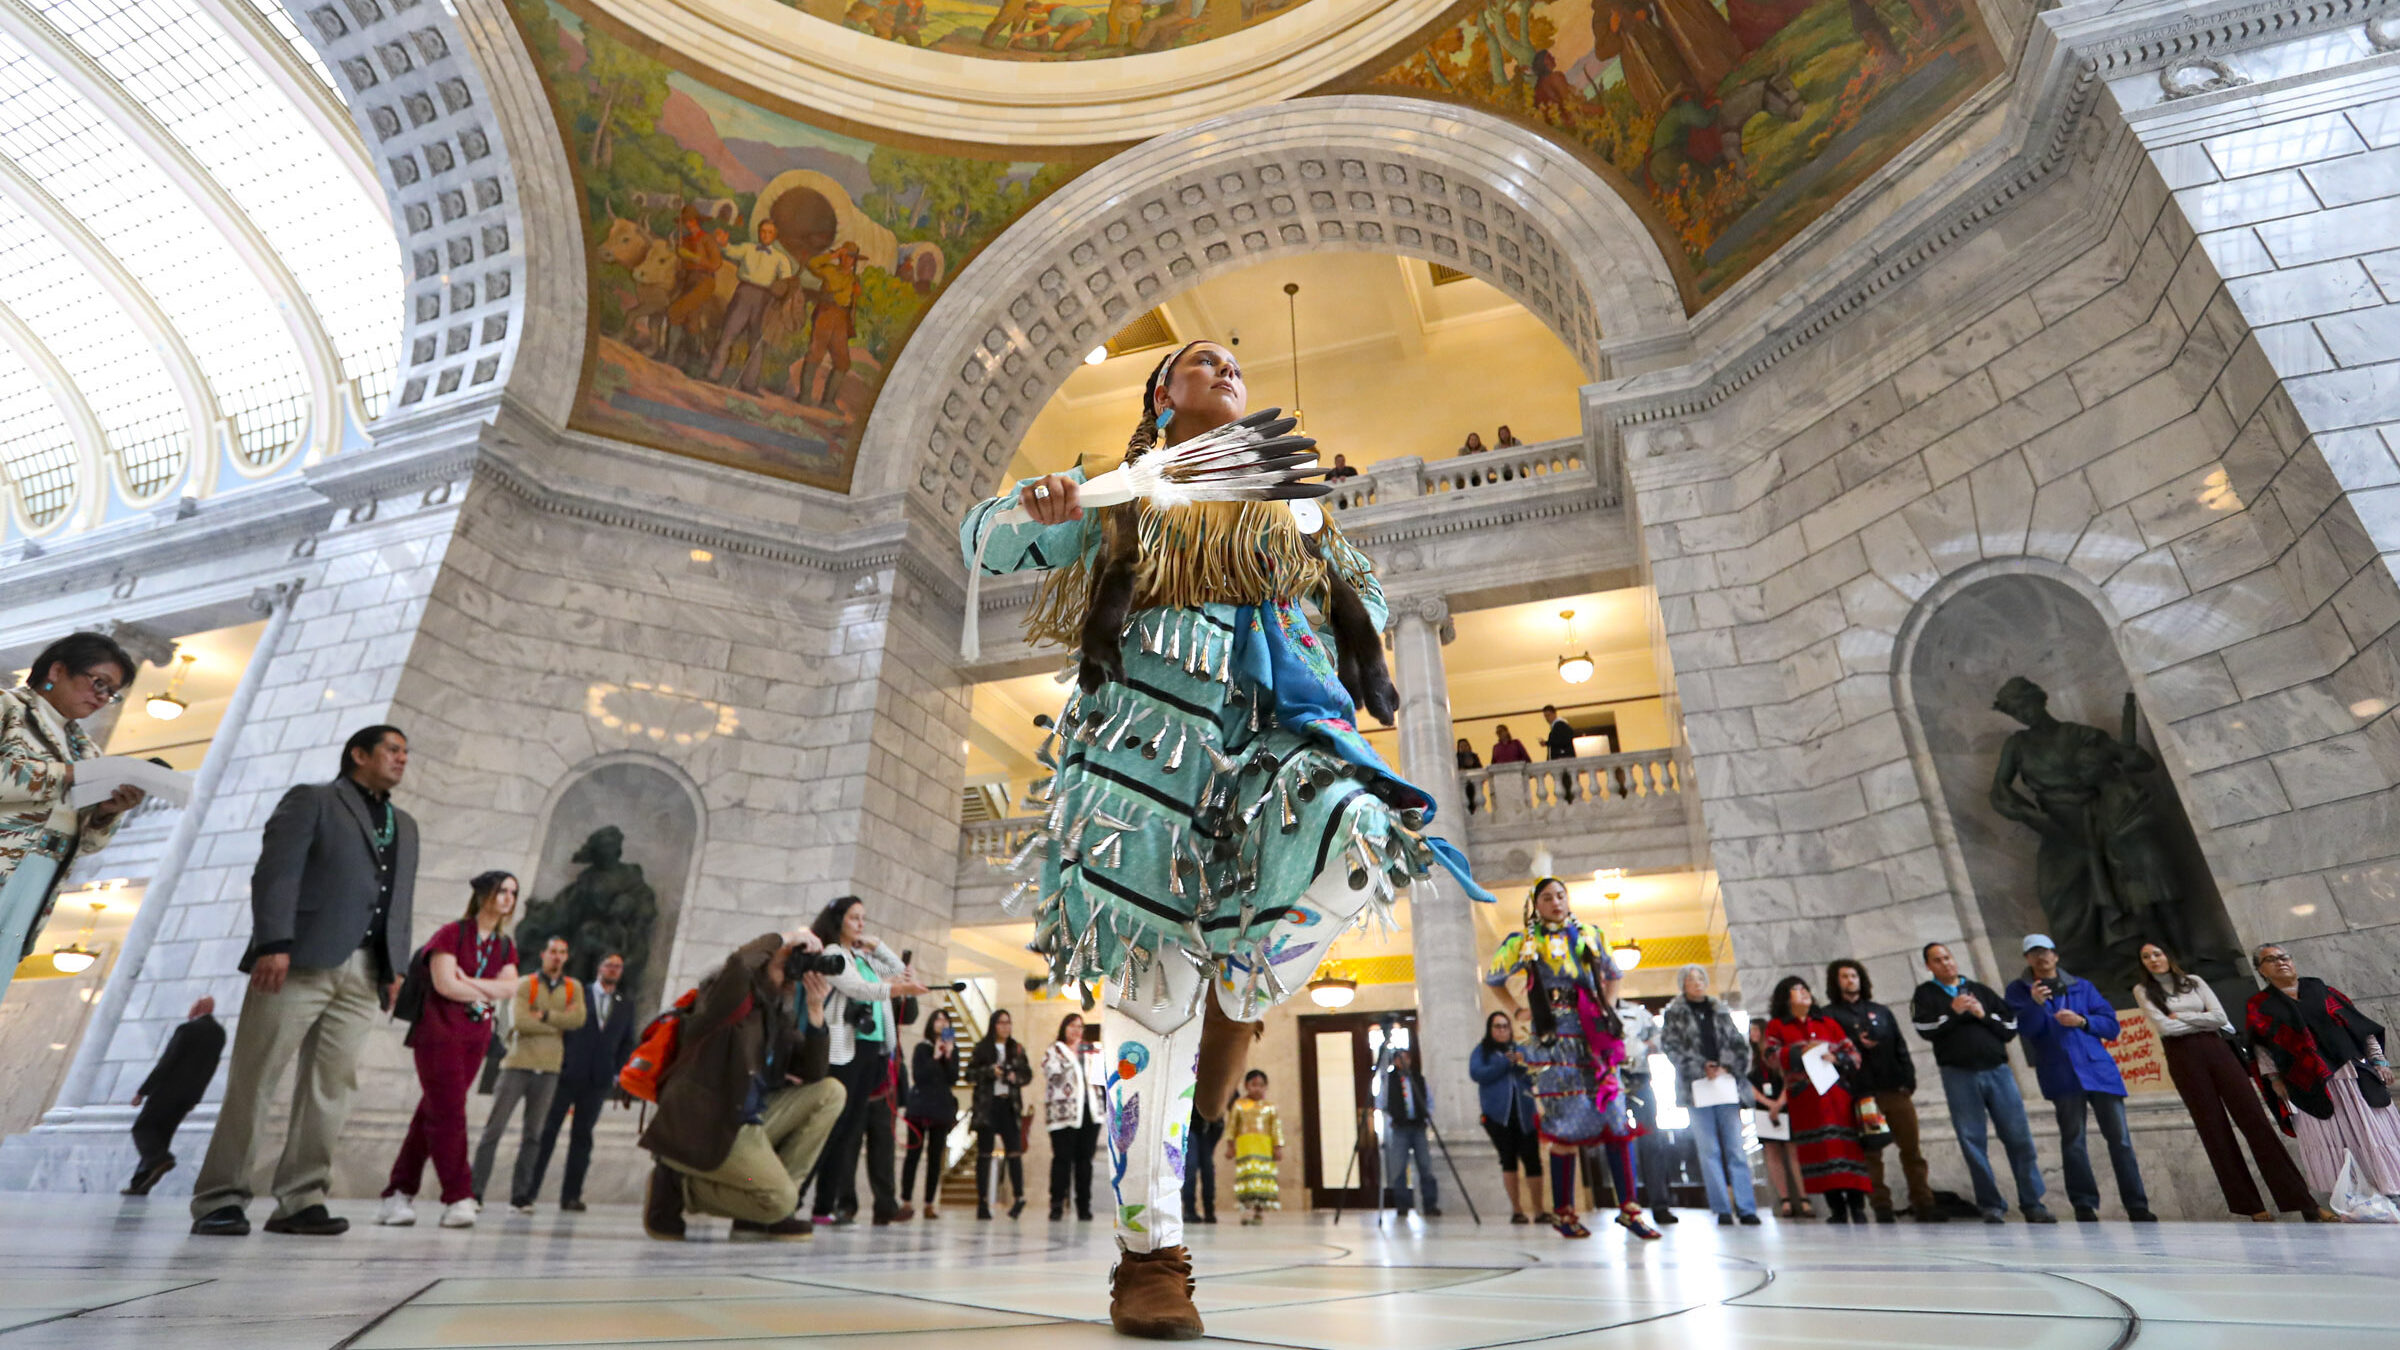 Tayler Gutierrez, of Sandy, performs the Jingle Dress dance during an event to raise awareness for ...